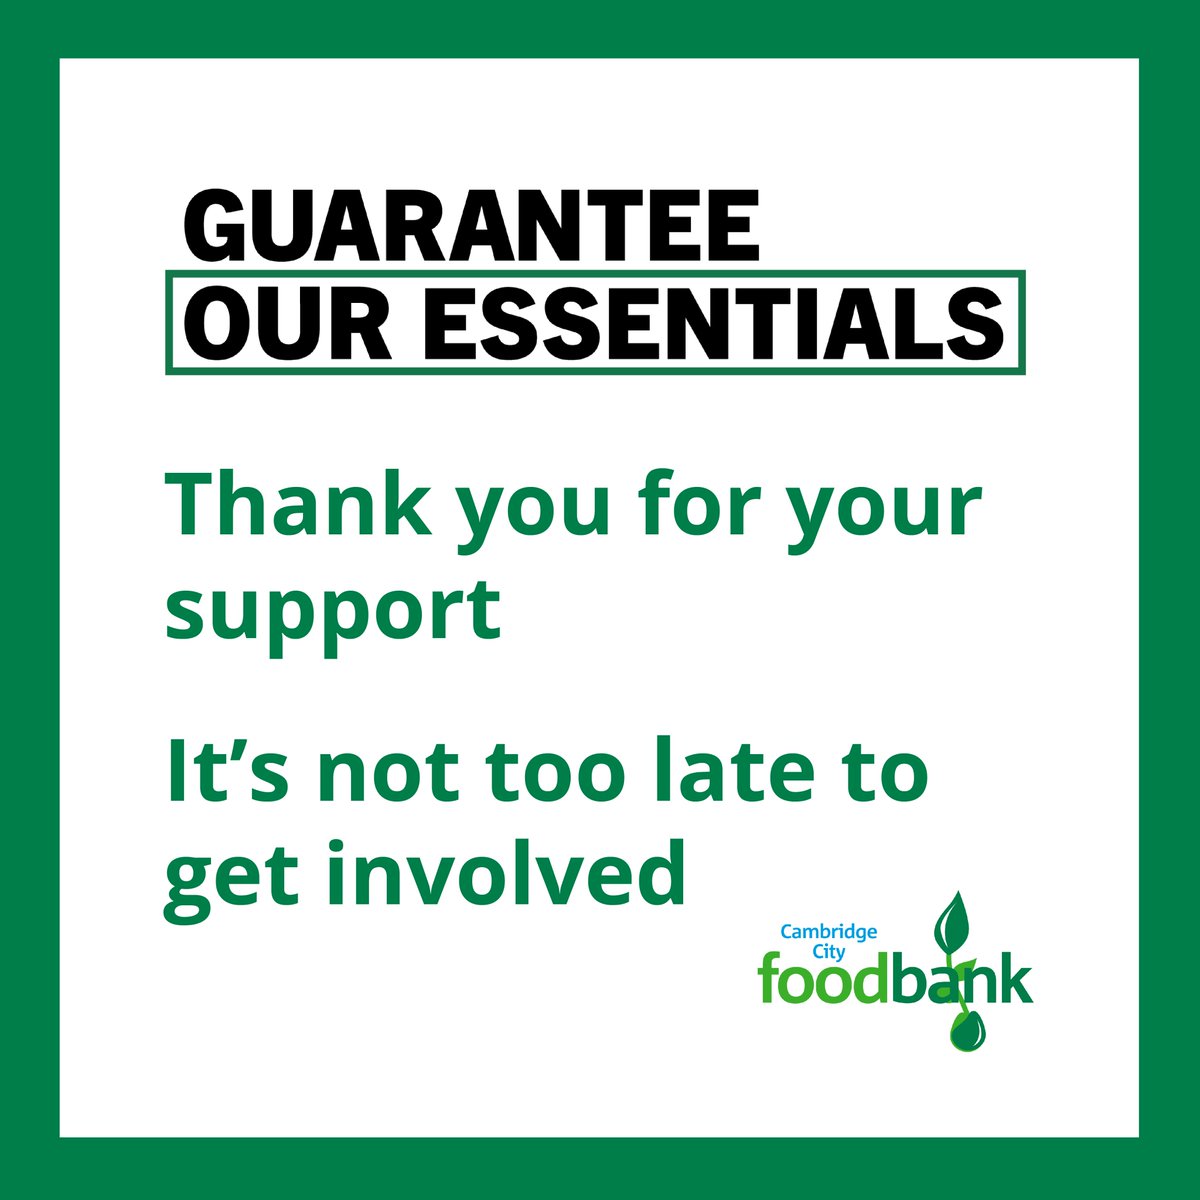 Last year, we backed the #GuaranteeOurEssentialsCampaign and, thanks to your support, the petition was signed by over 150,000 people! It’s not too late to get involved! Support the campaign here: trusselltrust.org/get-involved/c…